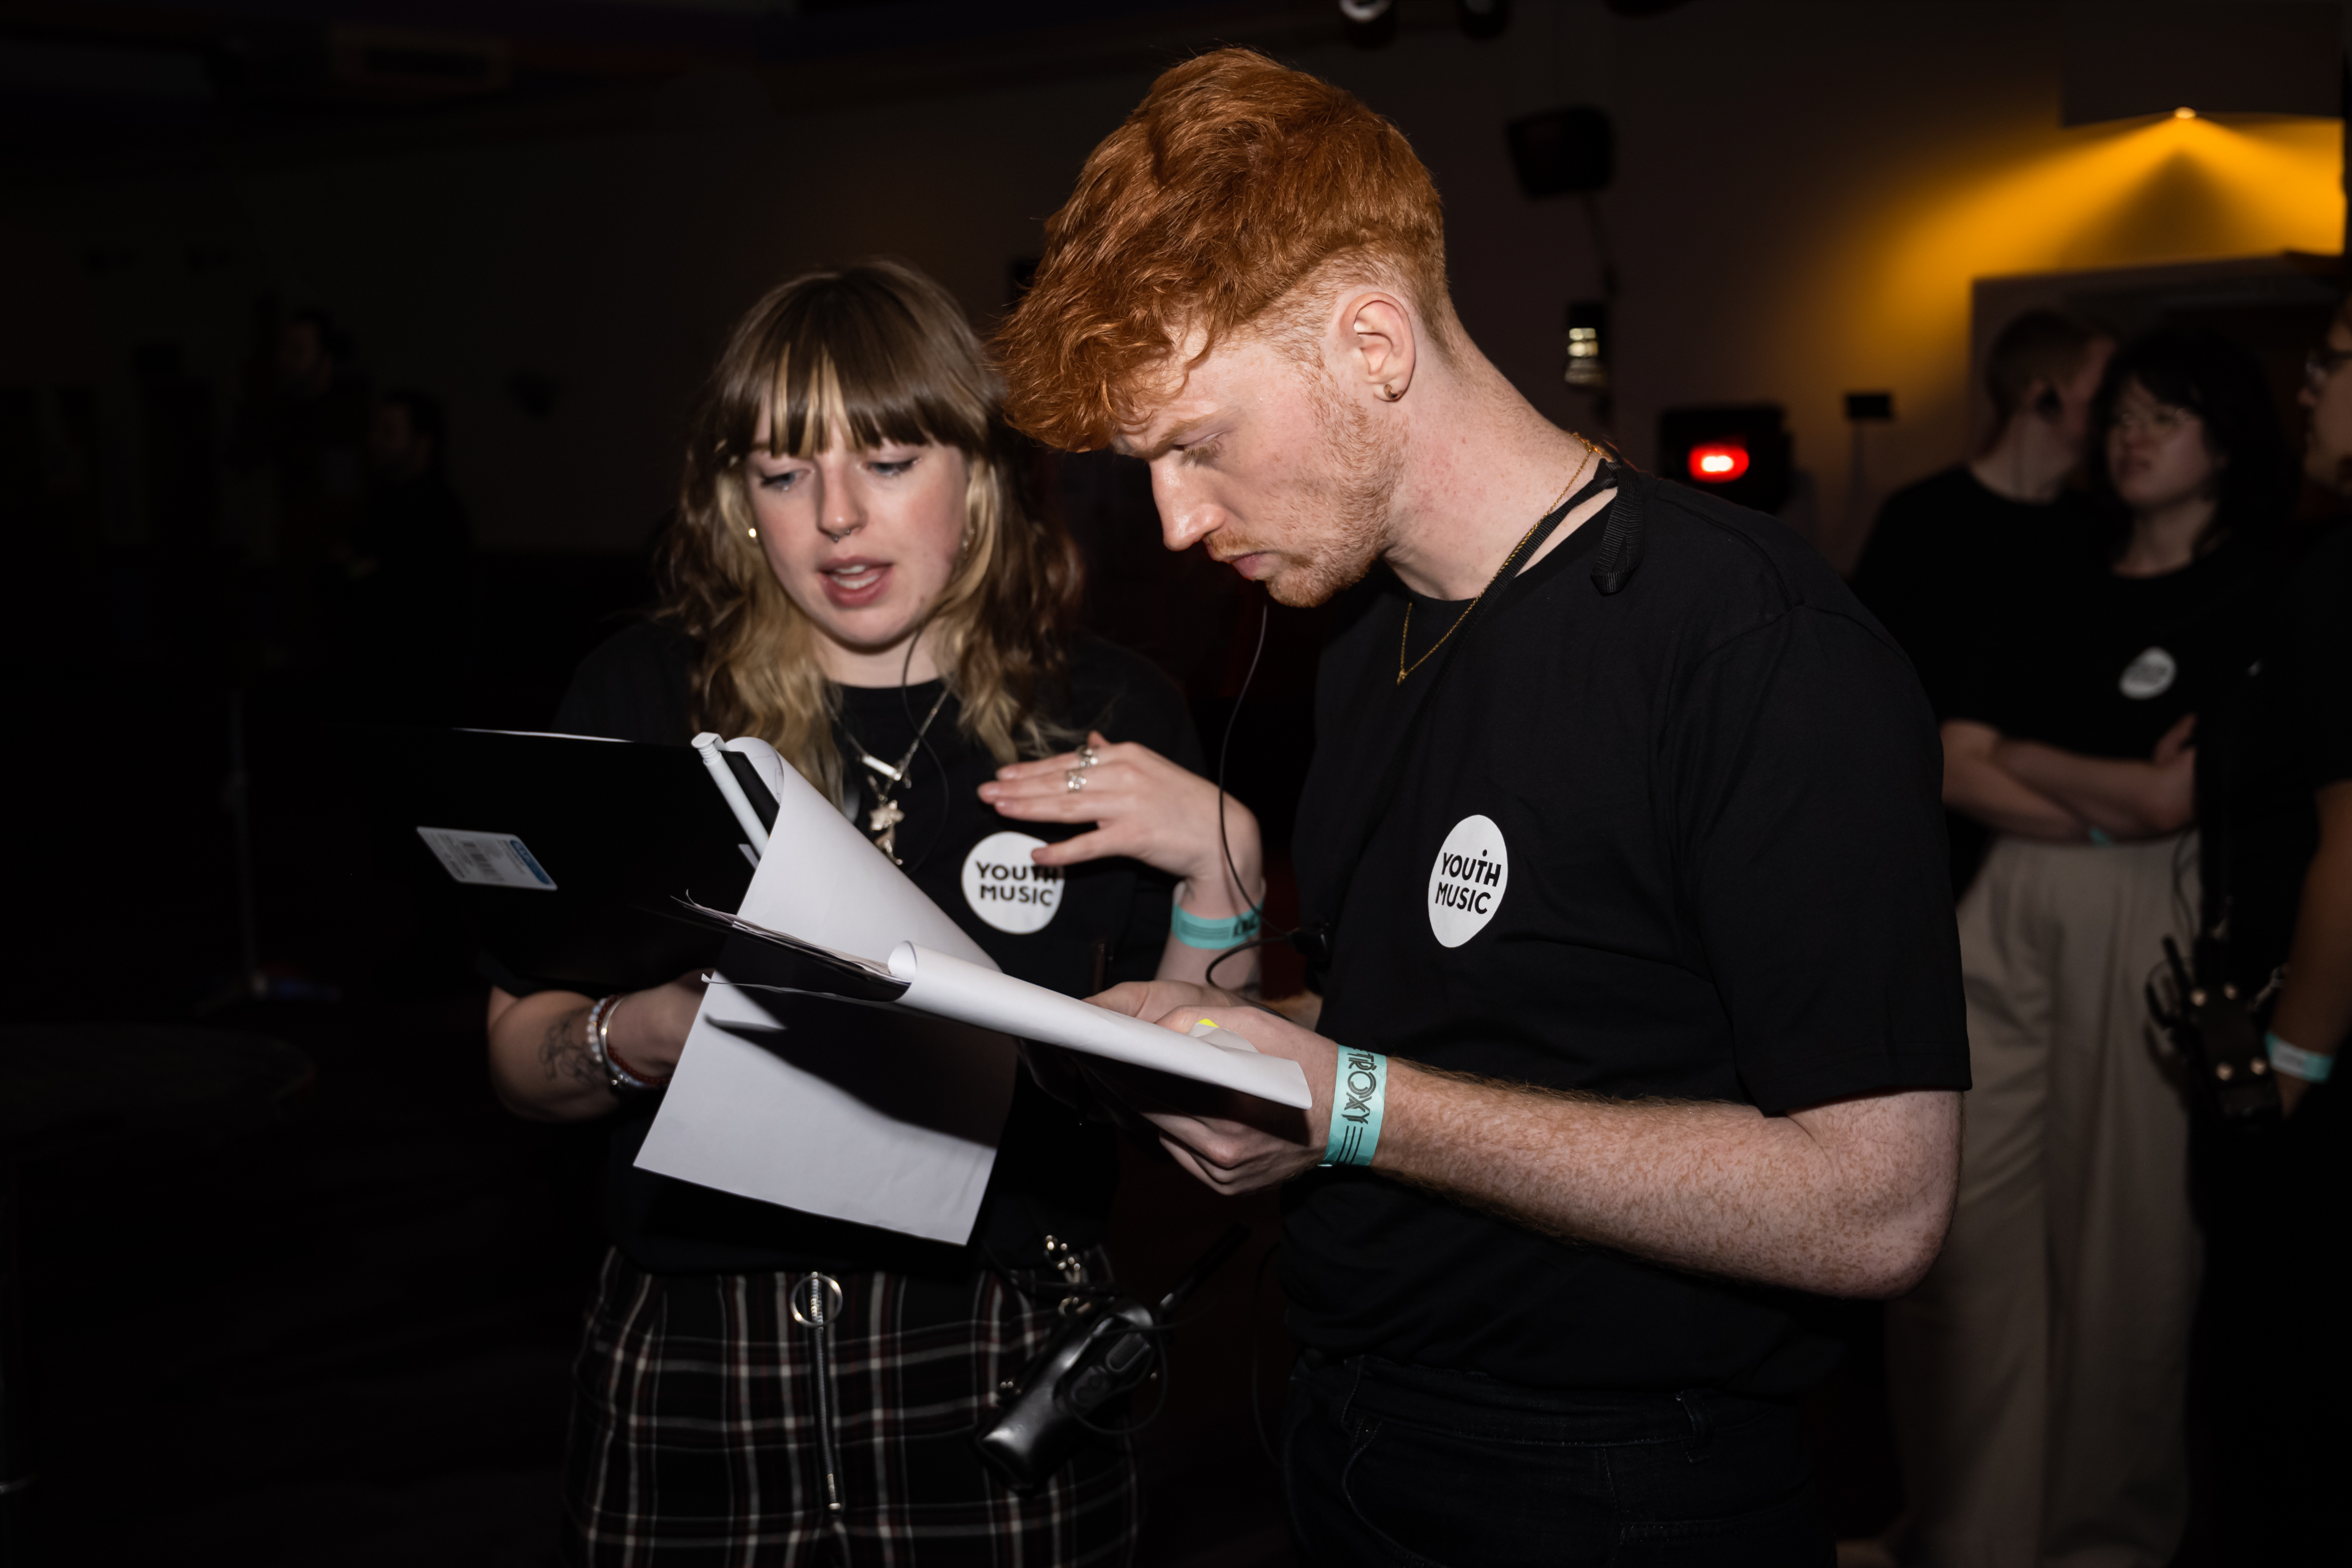 two young people look at clipboards in a dark room. they are both wearing black youth music awards t-shirts